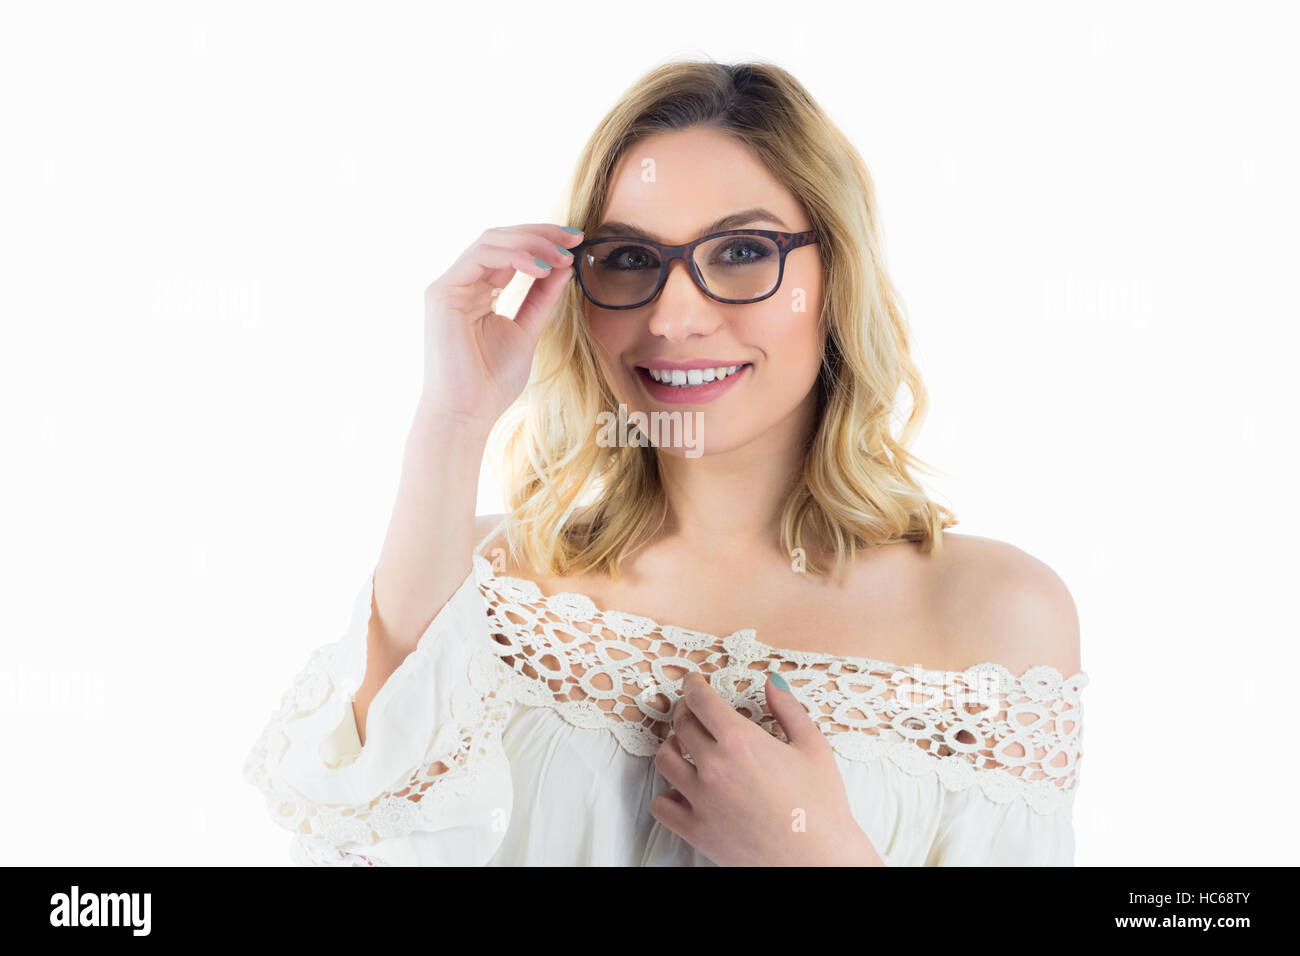 Portrait of beautiful woman posing with spectacles against white background Stock Photo